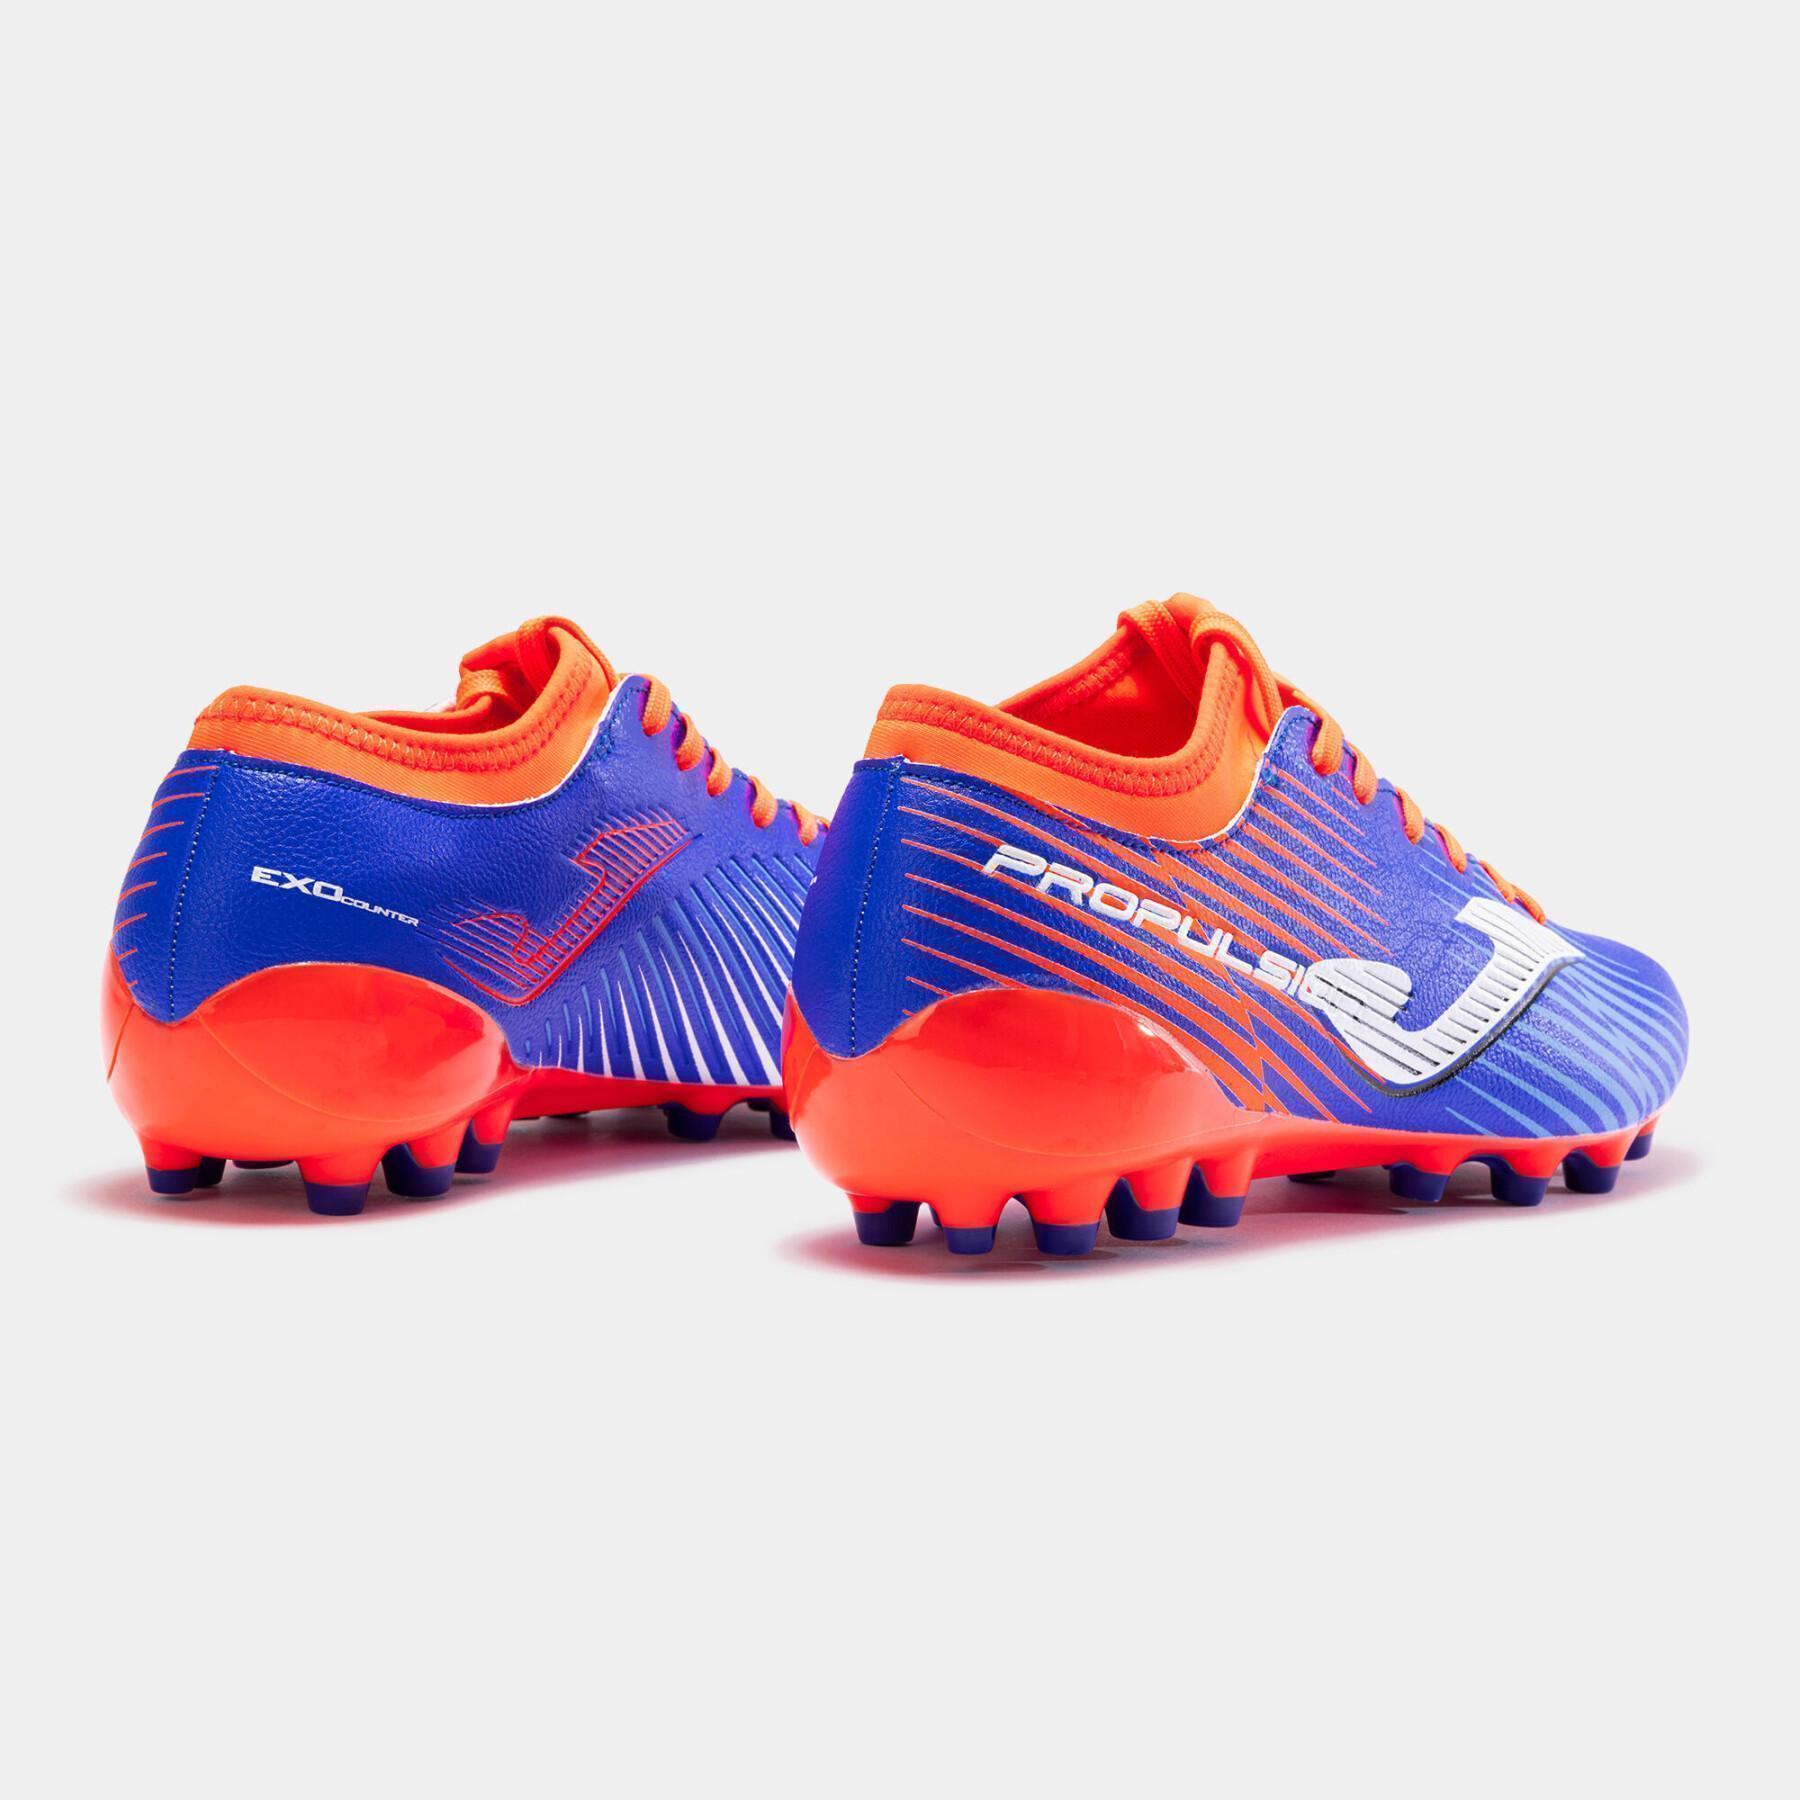 Chaussures de football Joma Propulsion Cup 2305 AG